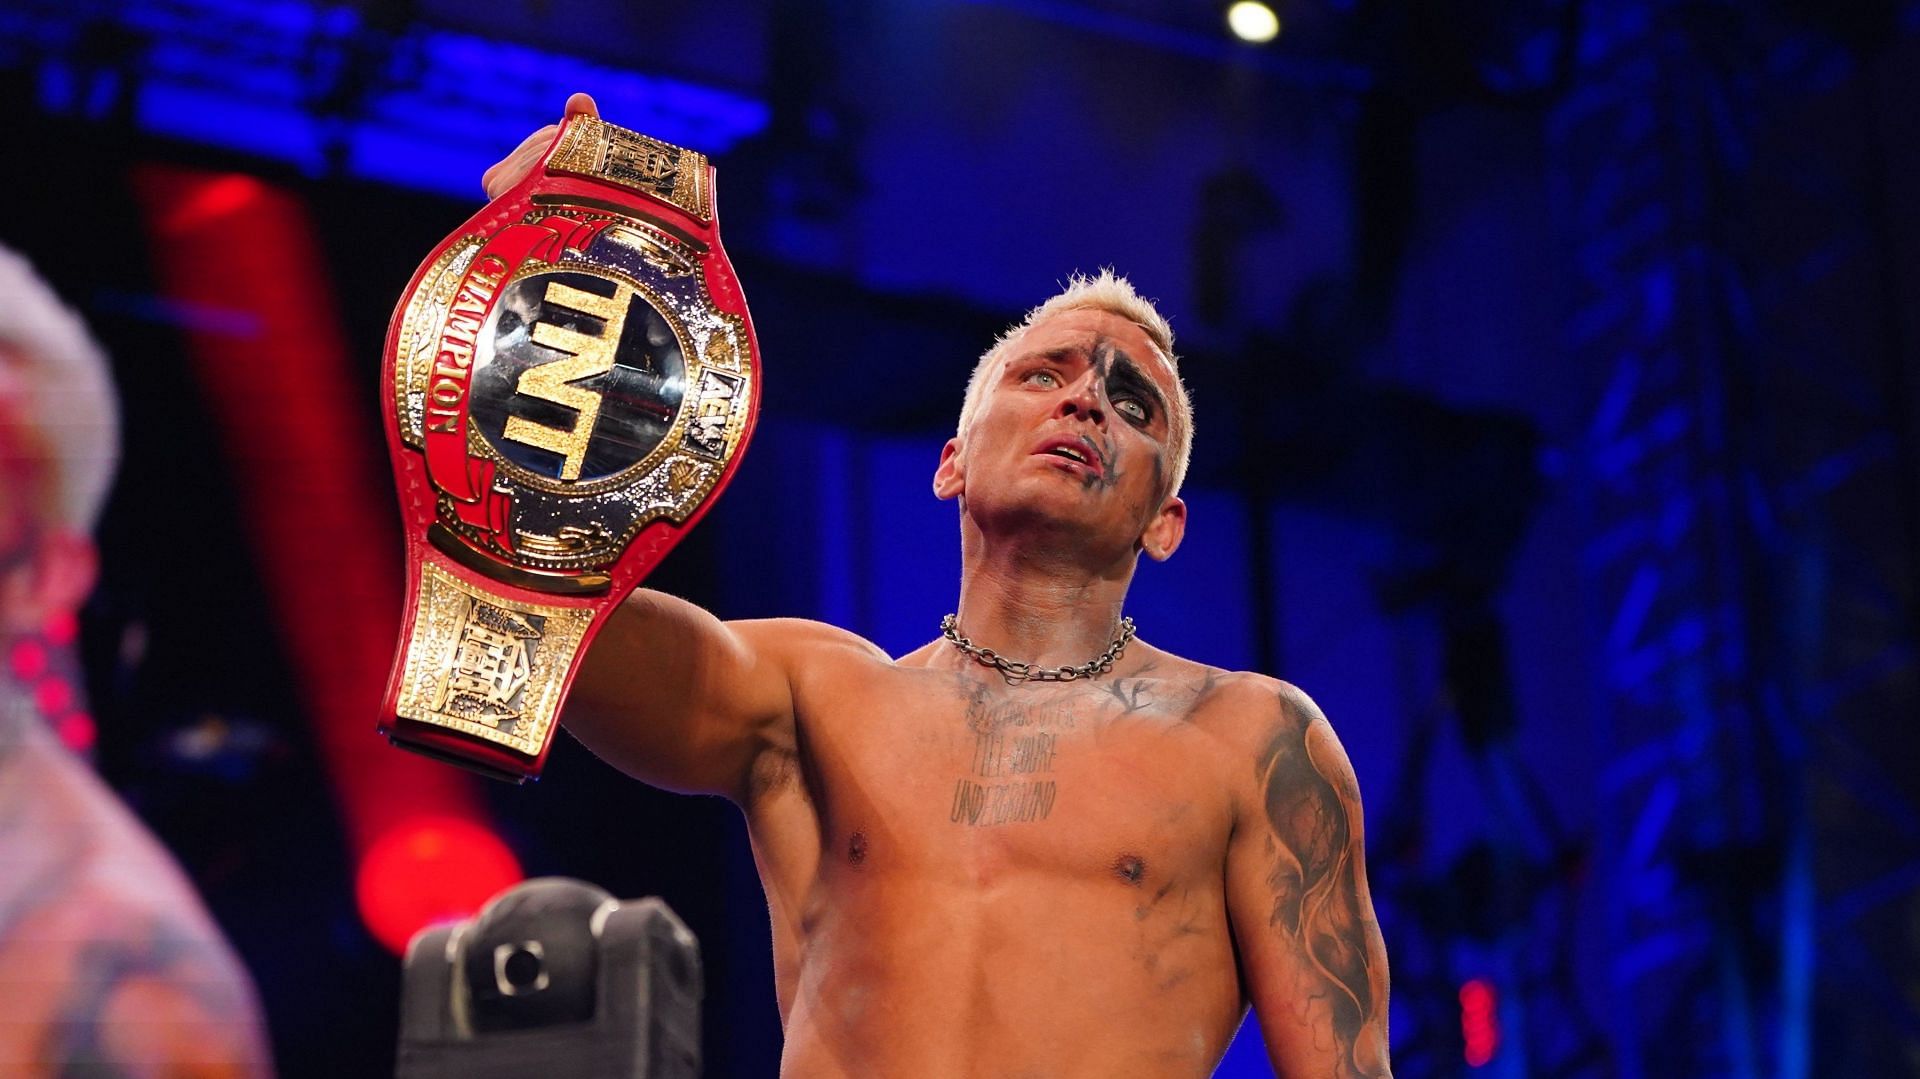 Darby Allin is the current TNT Champion